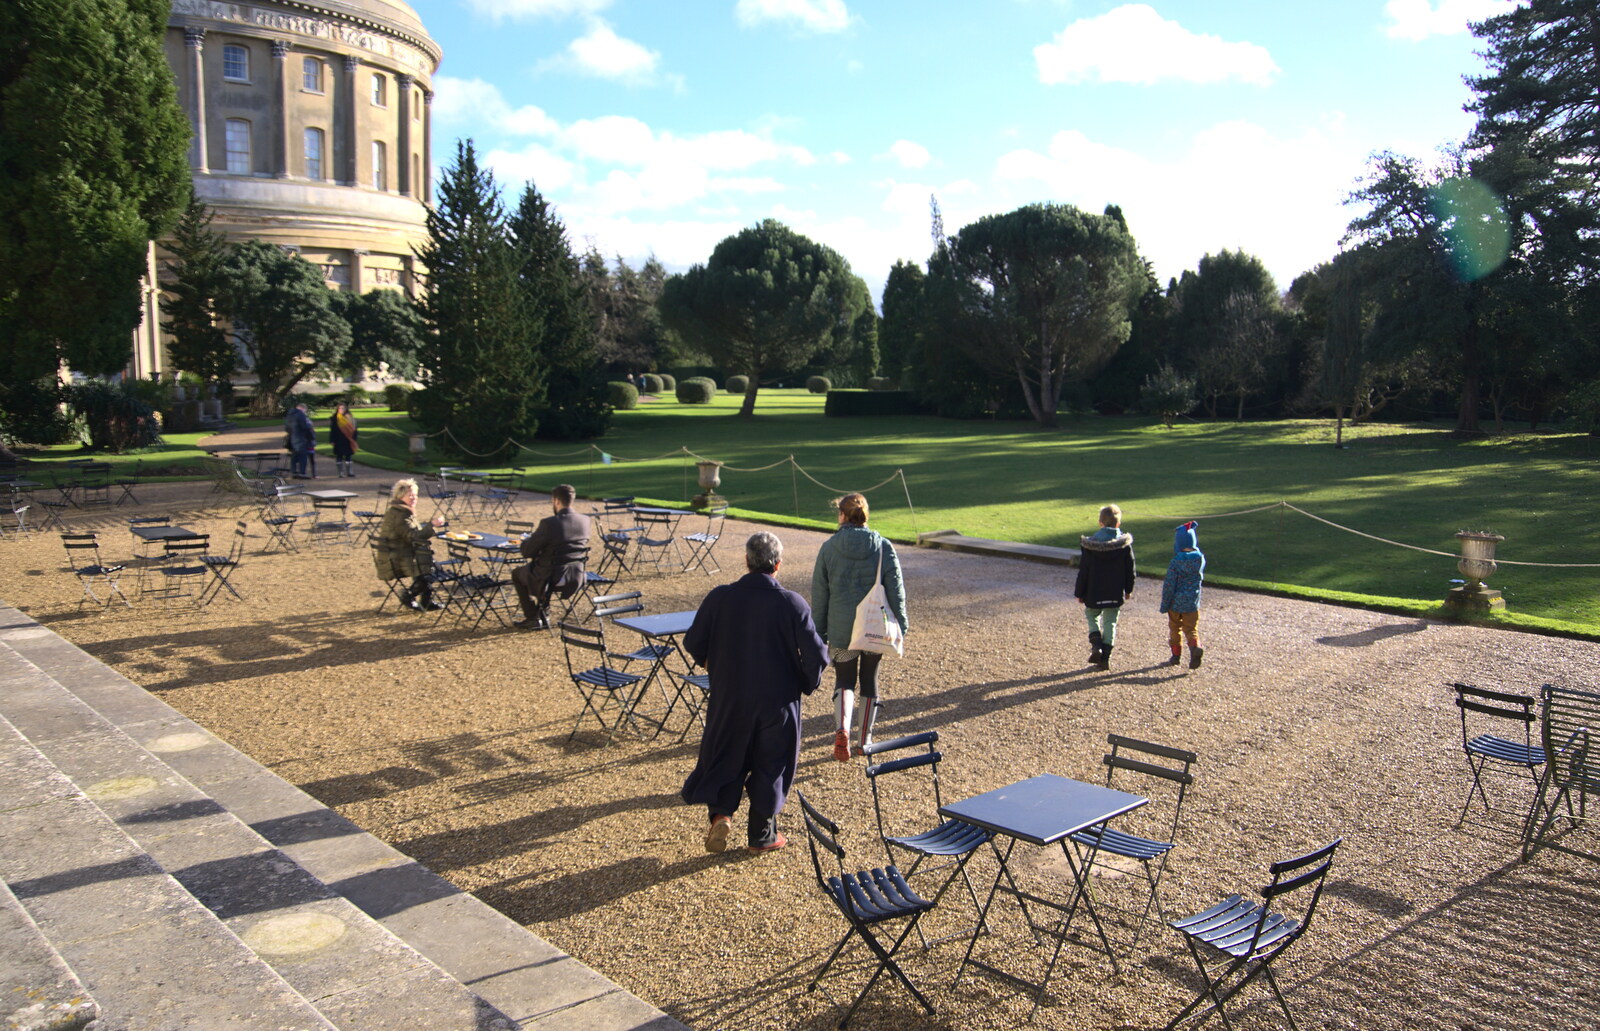 Outside on the patio from Life Below Stairs, Ickworth House, Horringer, Suffolk - 28th January 2018